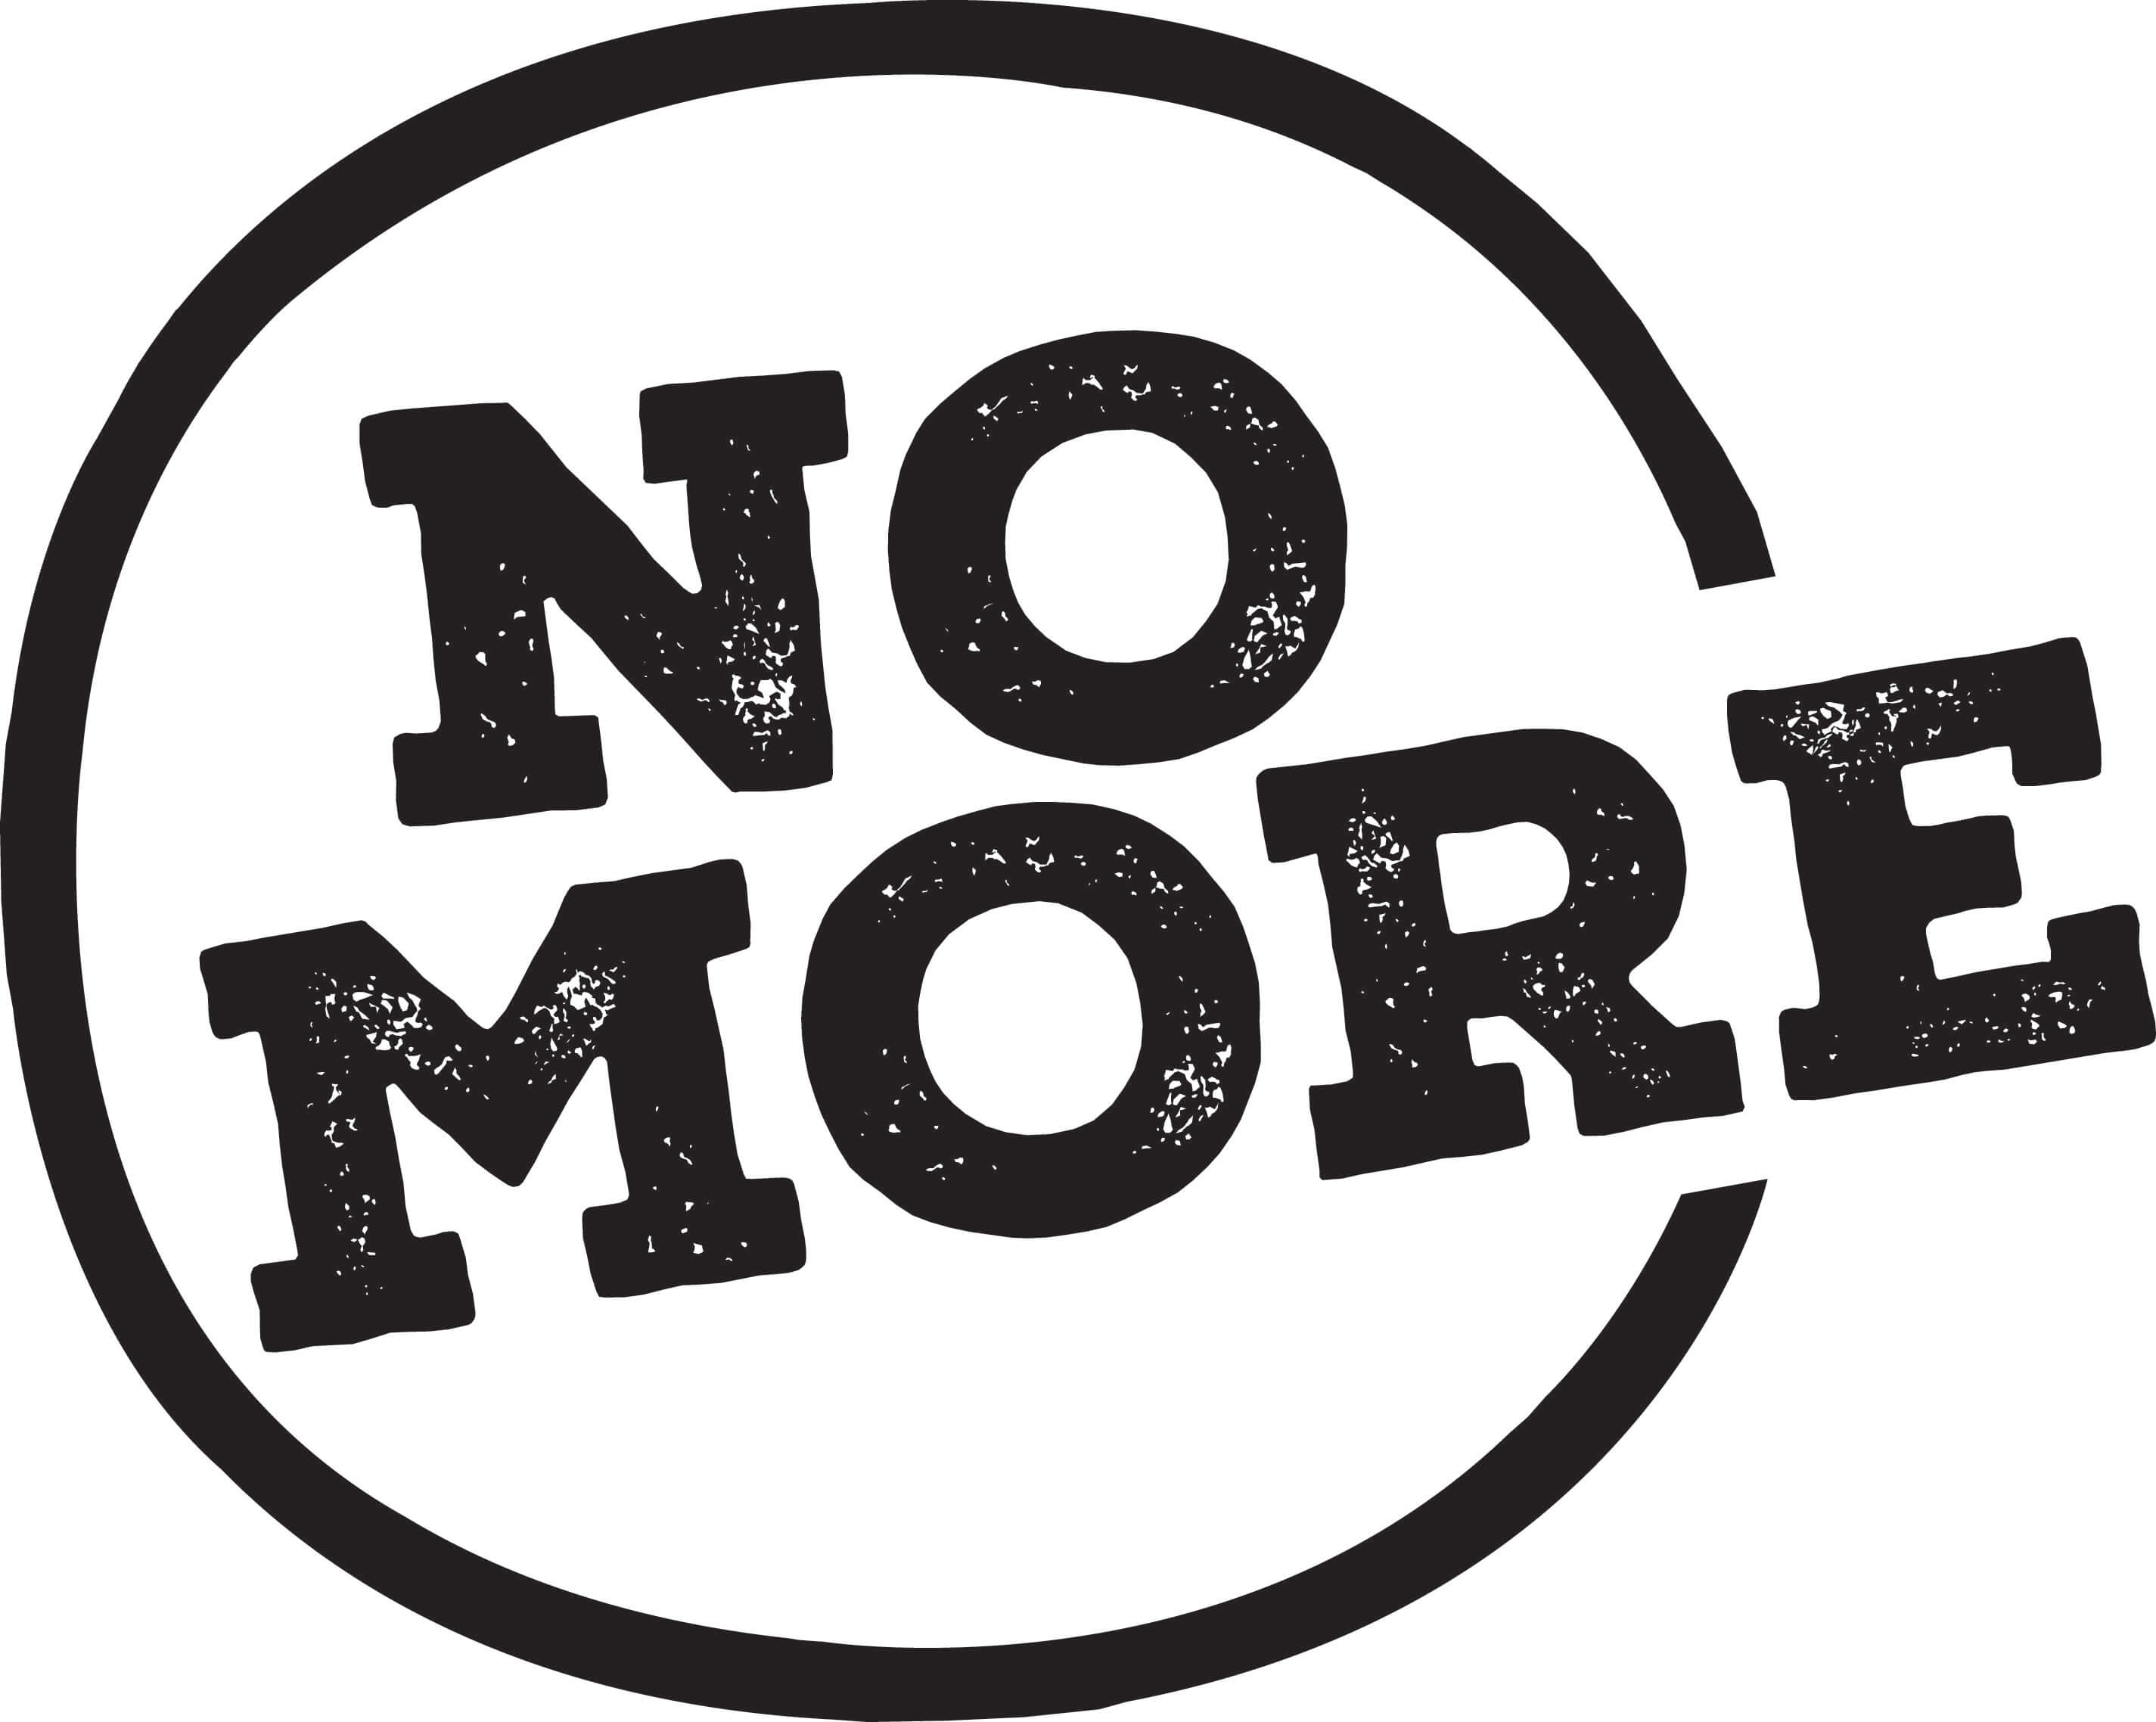 No More | Link up and say 'No More' to family violence